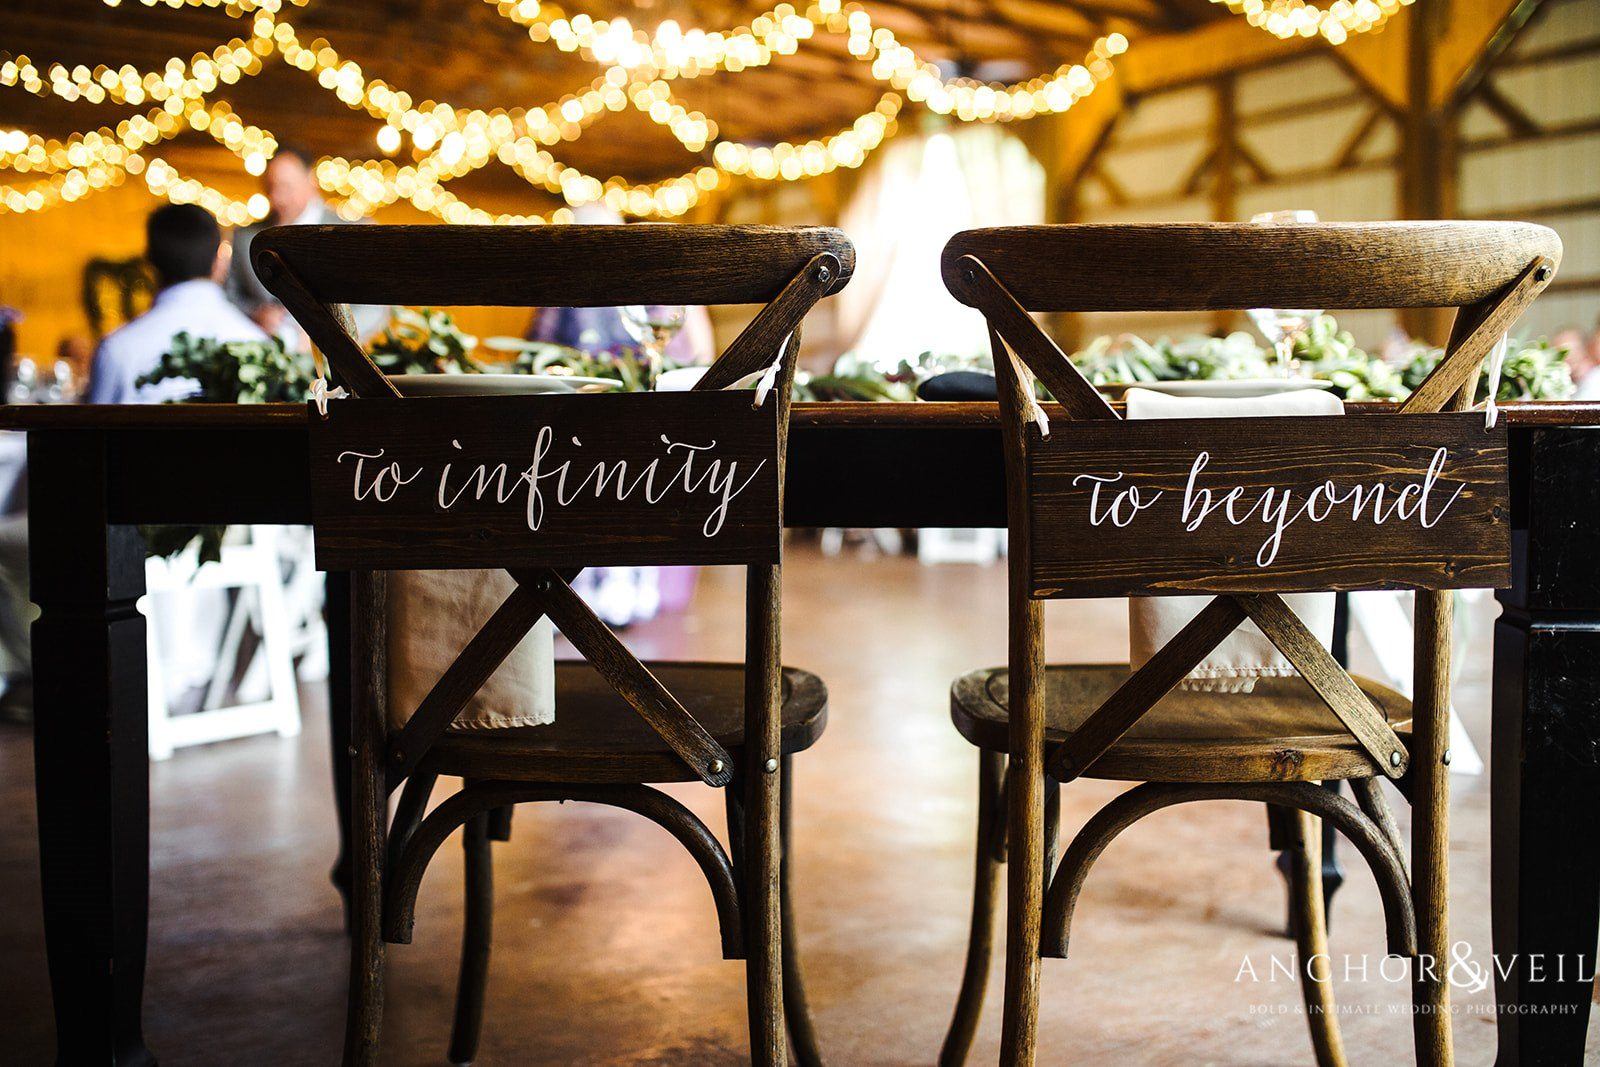 The couple's "to infinity" and "to beyond" chairs for the reception at The Farm at Brusharbor Wedding